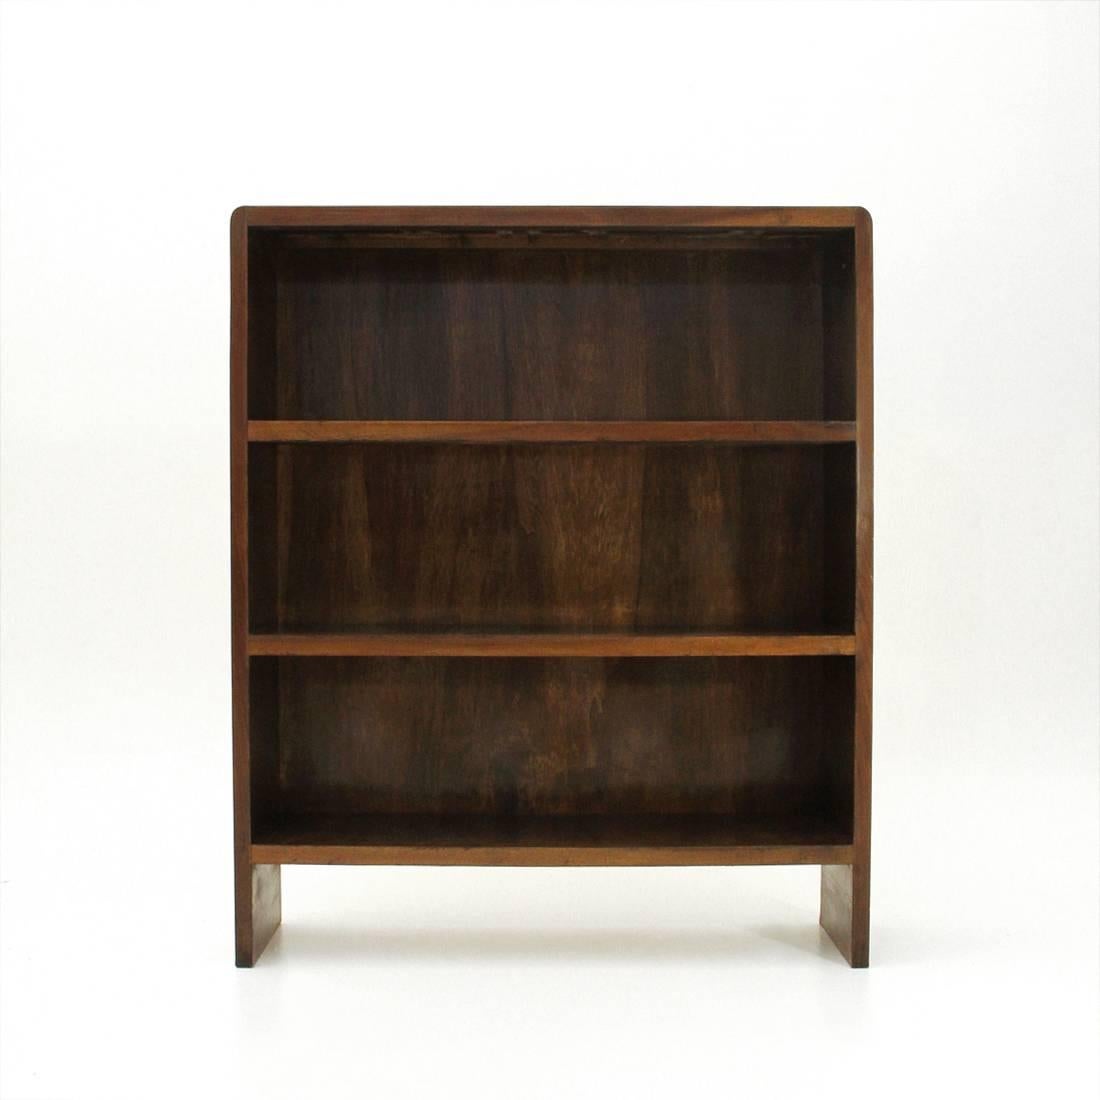 Italian bookcase of the 1940s.
Structure in wood veneered with rounded corners.
Three shelves.
Structure in good condition, some signs due to normal use over time.

Dimensions: Width 101 cm, depth 28.5 cm, height 120 cm.